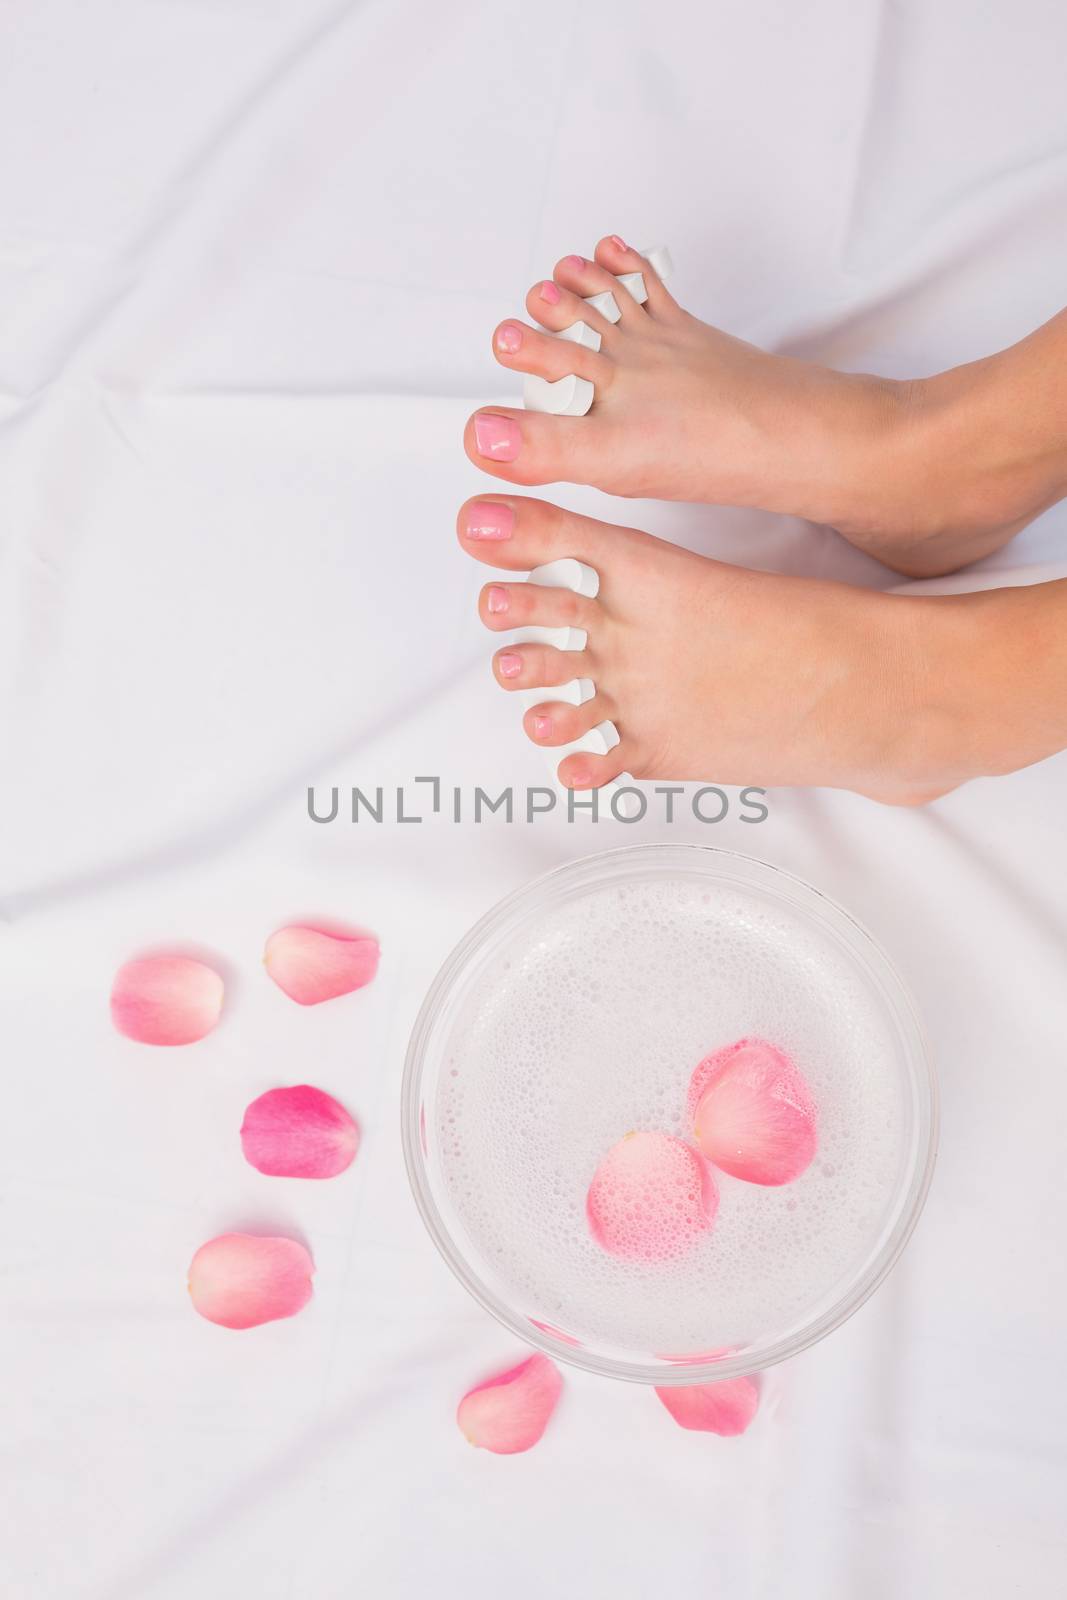 Womans feet after a pedicure at the beauty salon